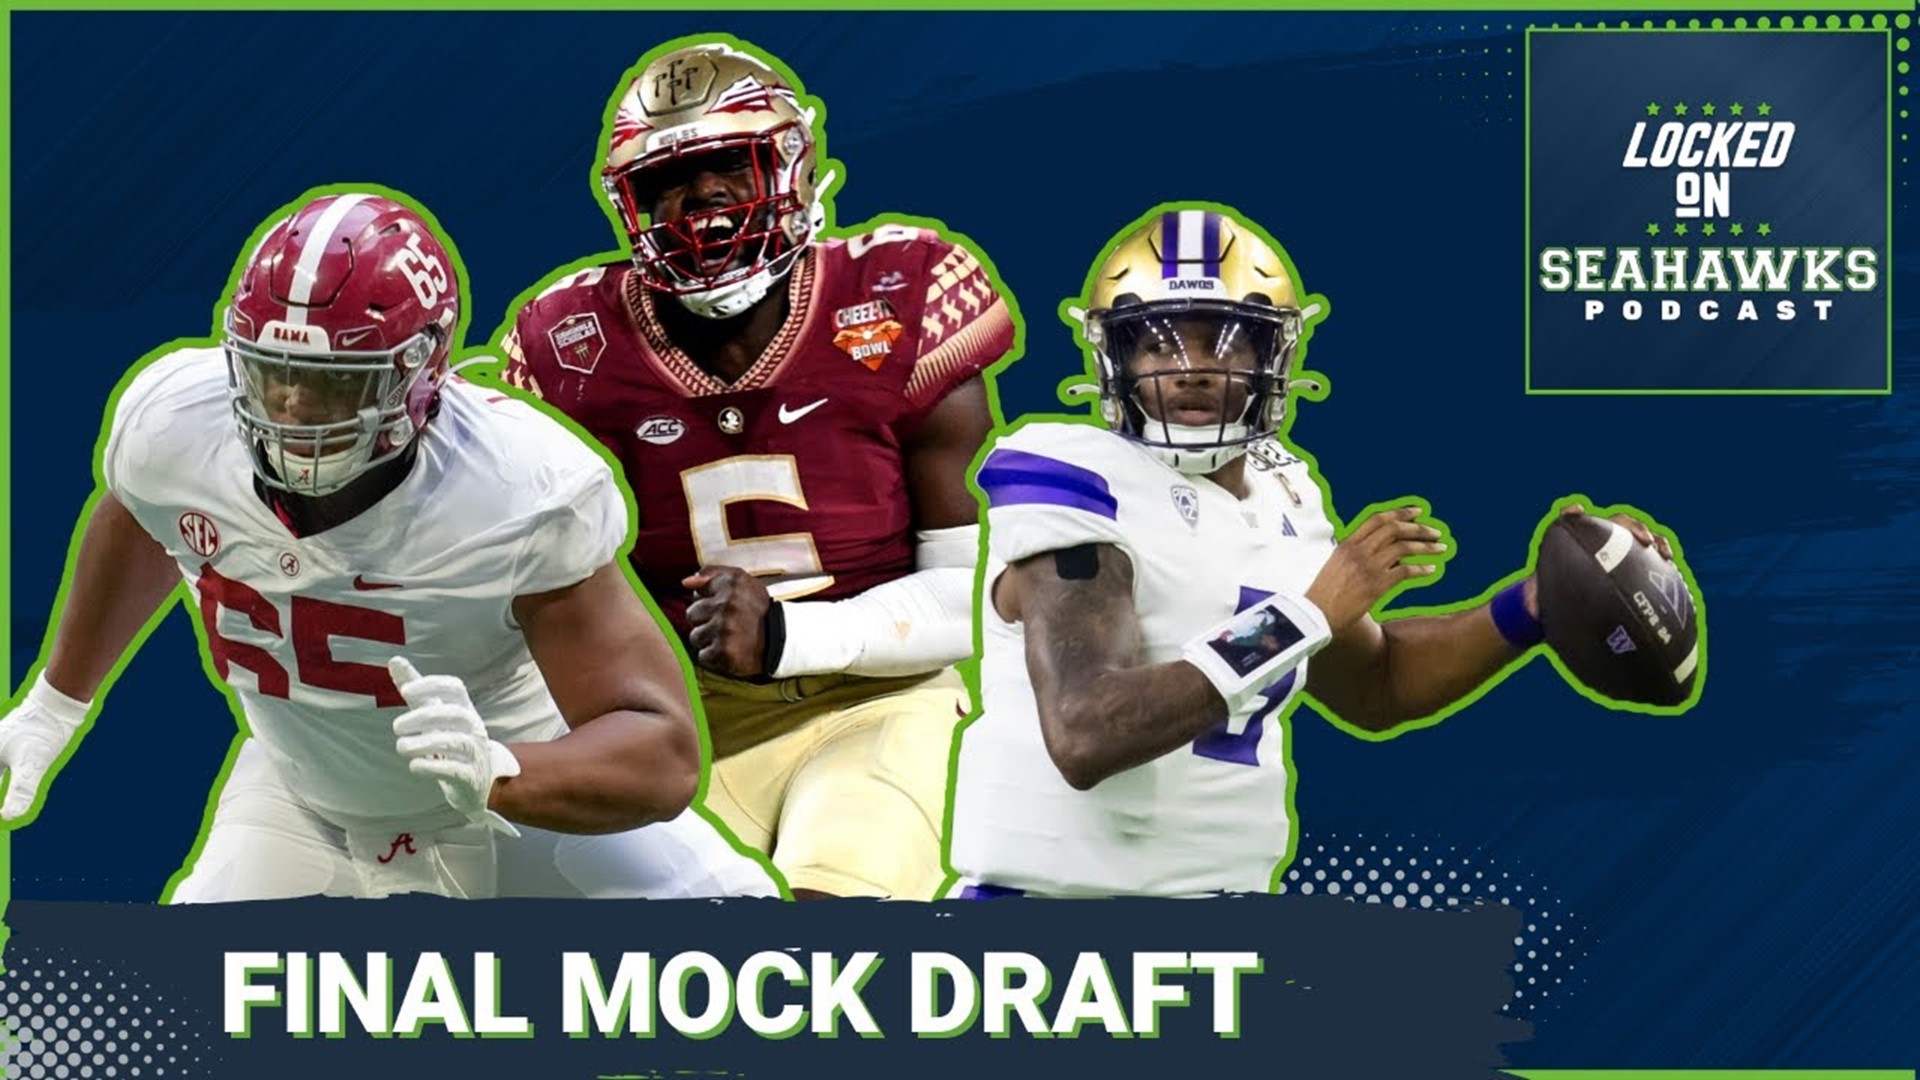 It's officially NFL Draft week and with the festivities set to kick off on Thursday night in Detroit, the Seahawks will soon be on the clock with the 16th pick